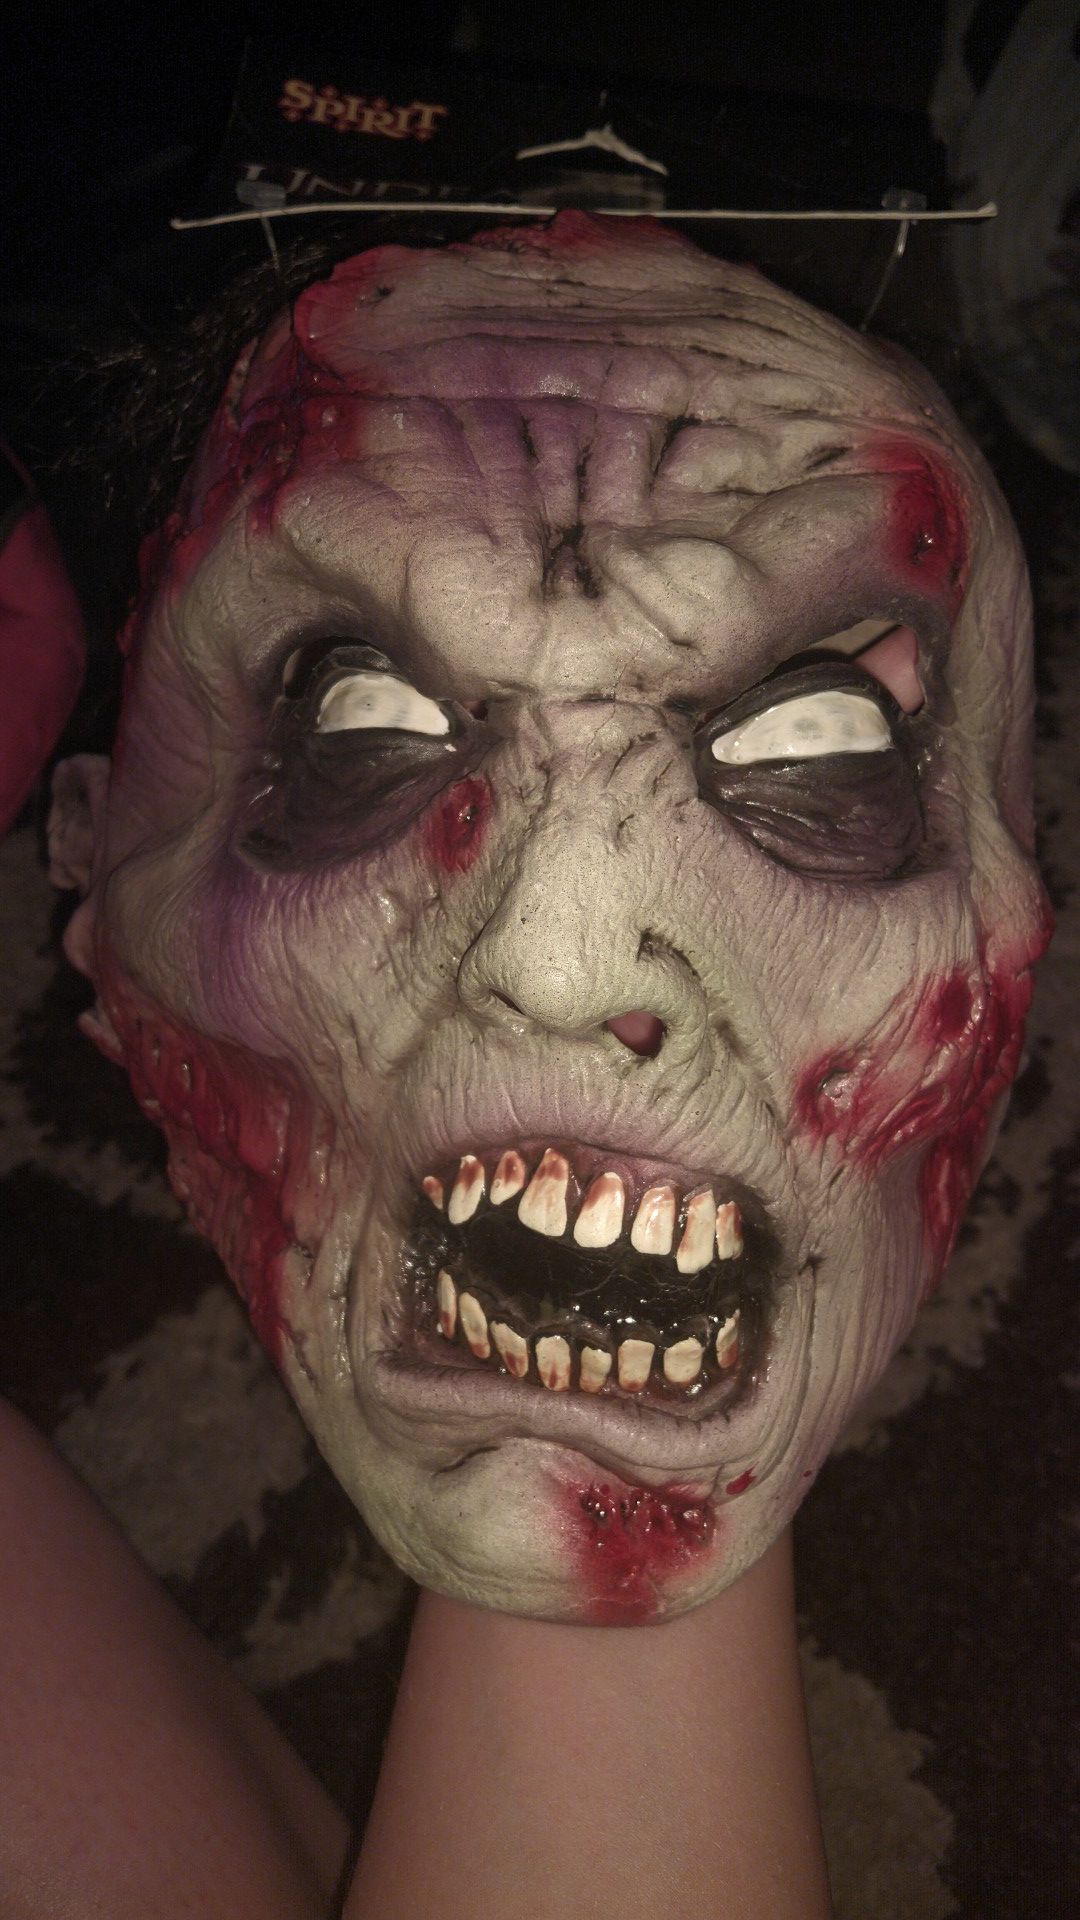 Zombie mask with brains showing and strains of hair costume